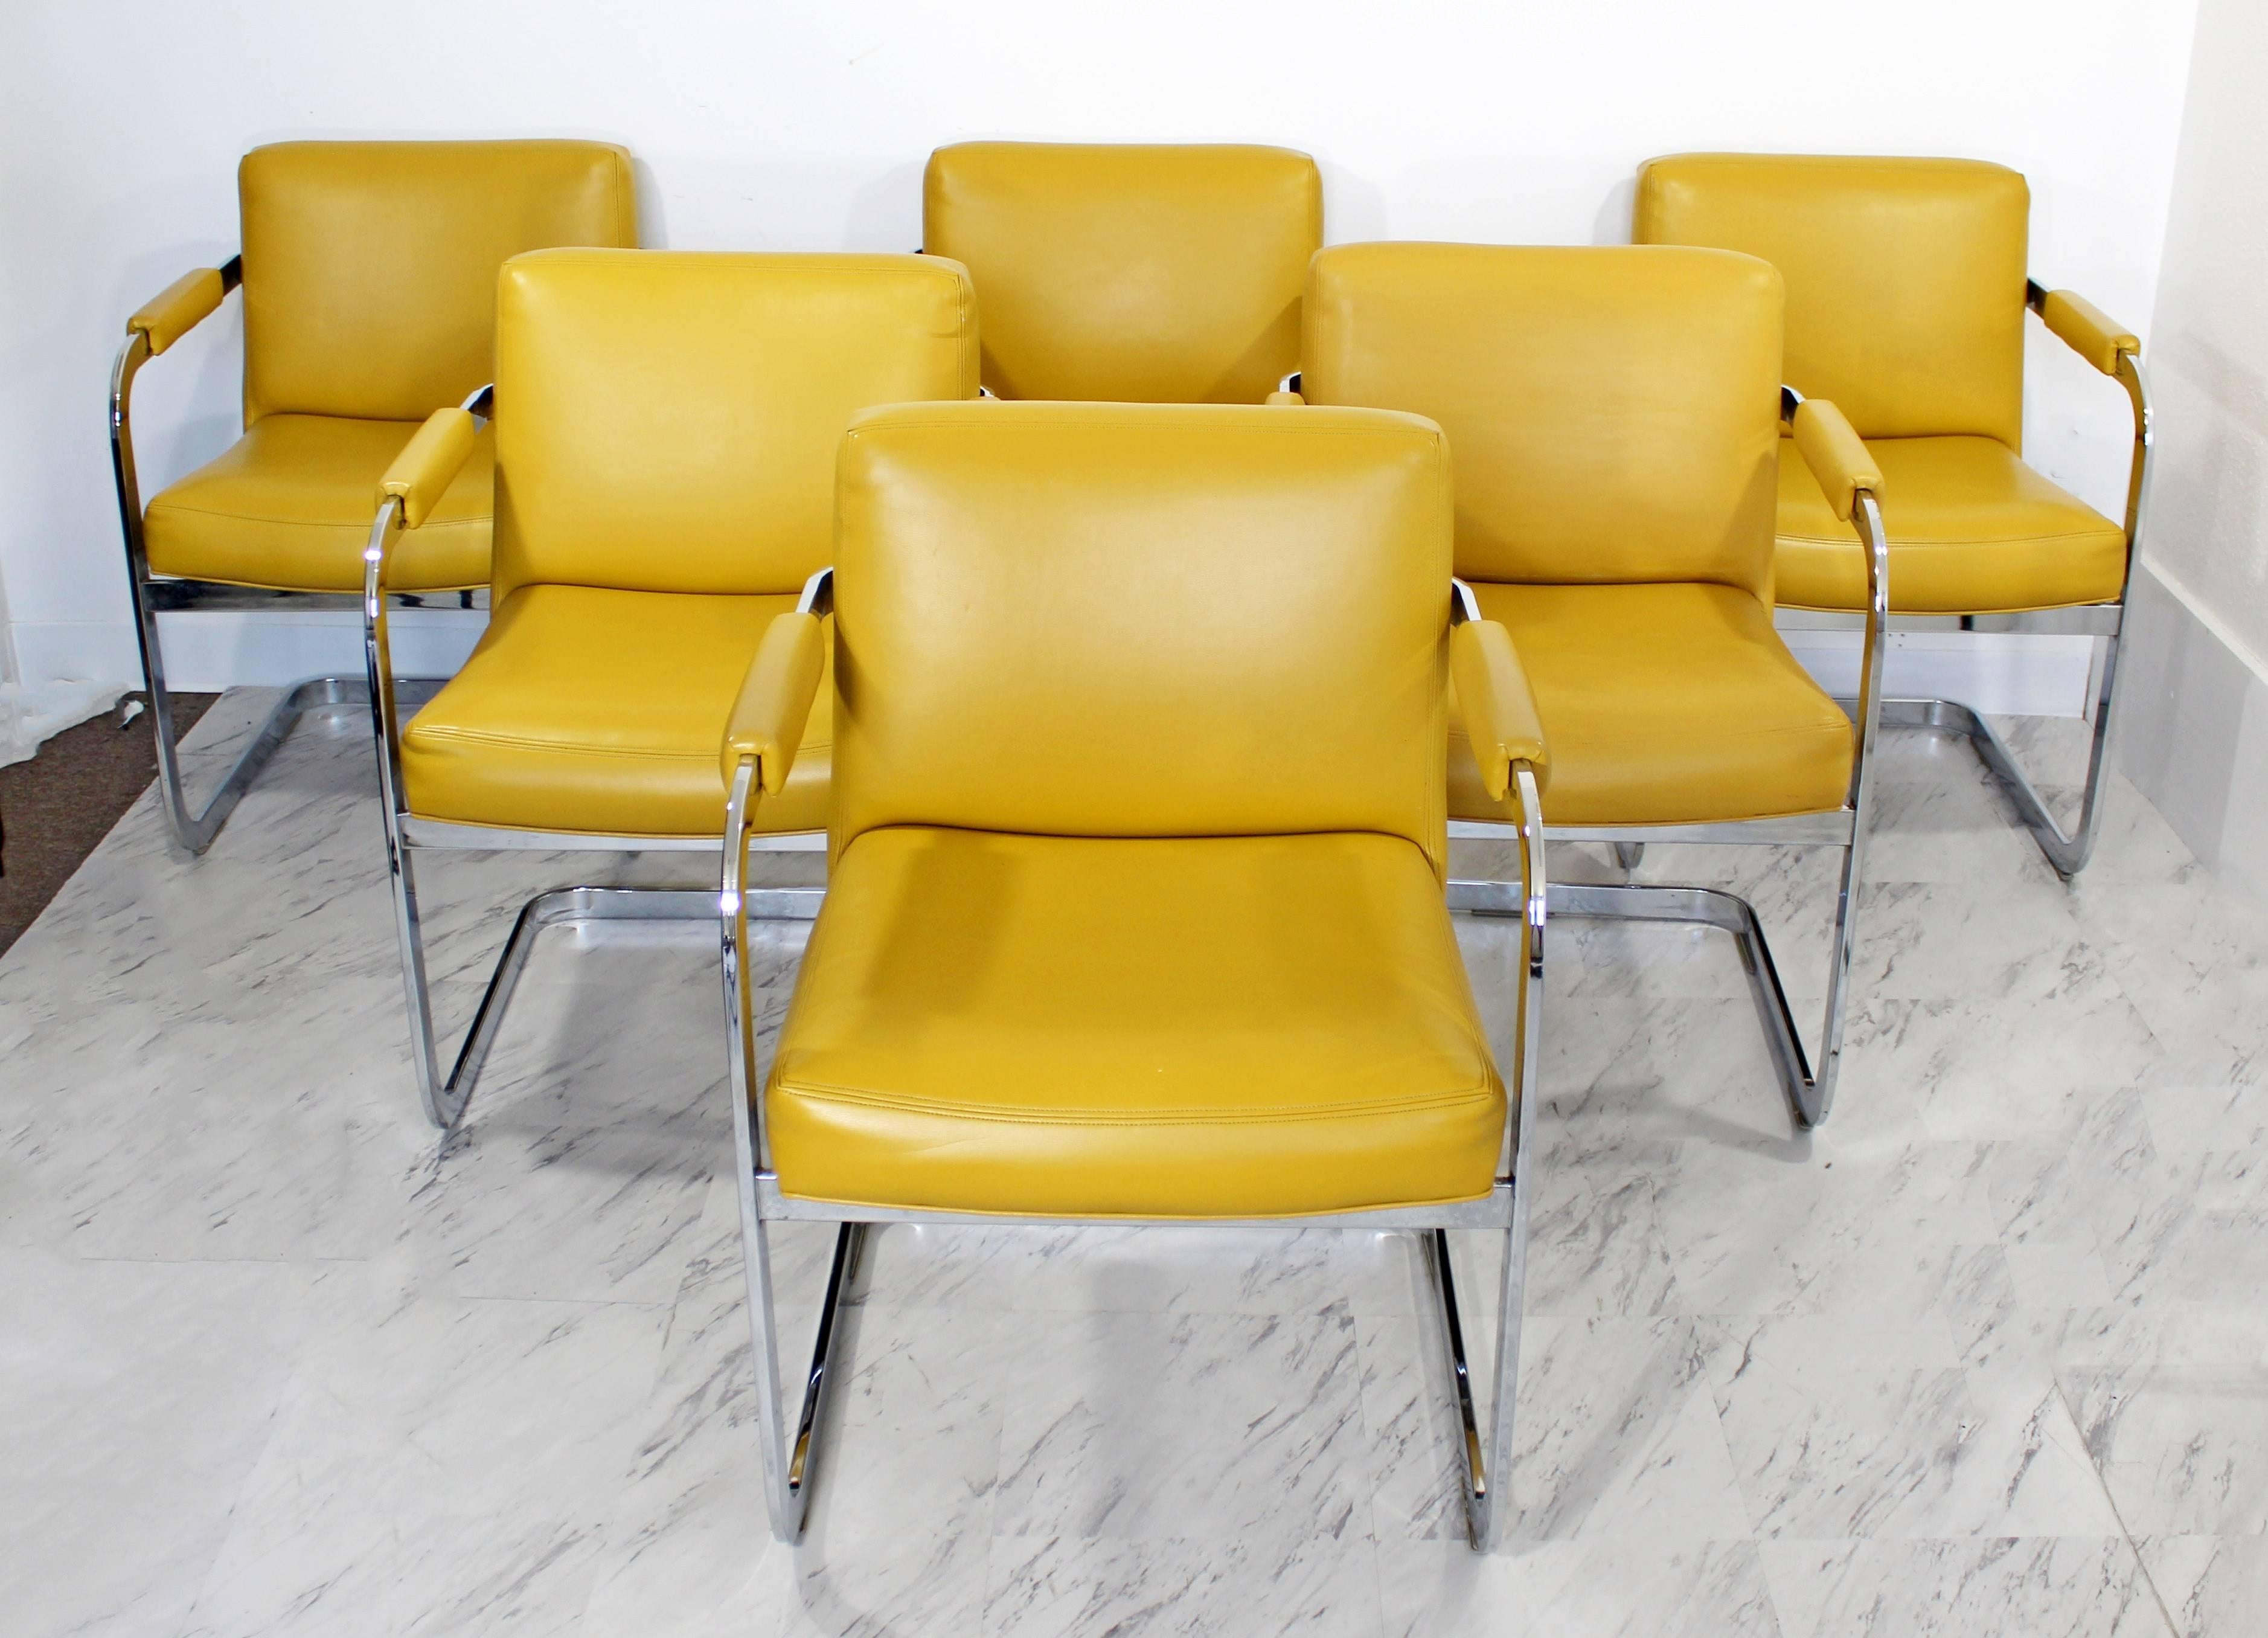 For your consideration is a fun and sexy, set of six, cantilever chrome dining chairs, designed by Milo Baughman for Thayer Coggin In very good condition, with original tags. Mustard yellow leather upholstery. The dimensions are 23